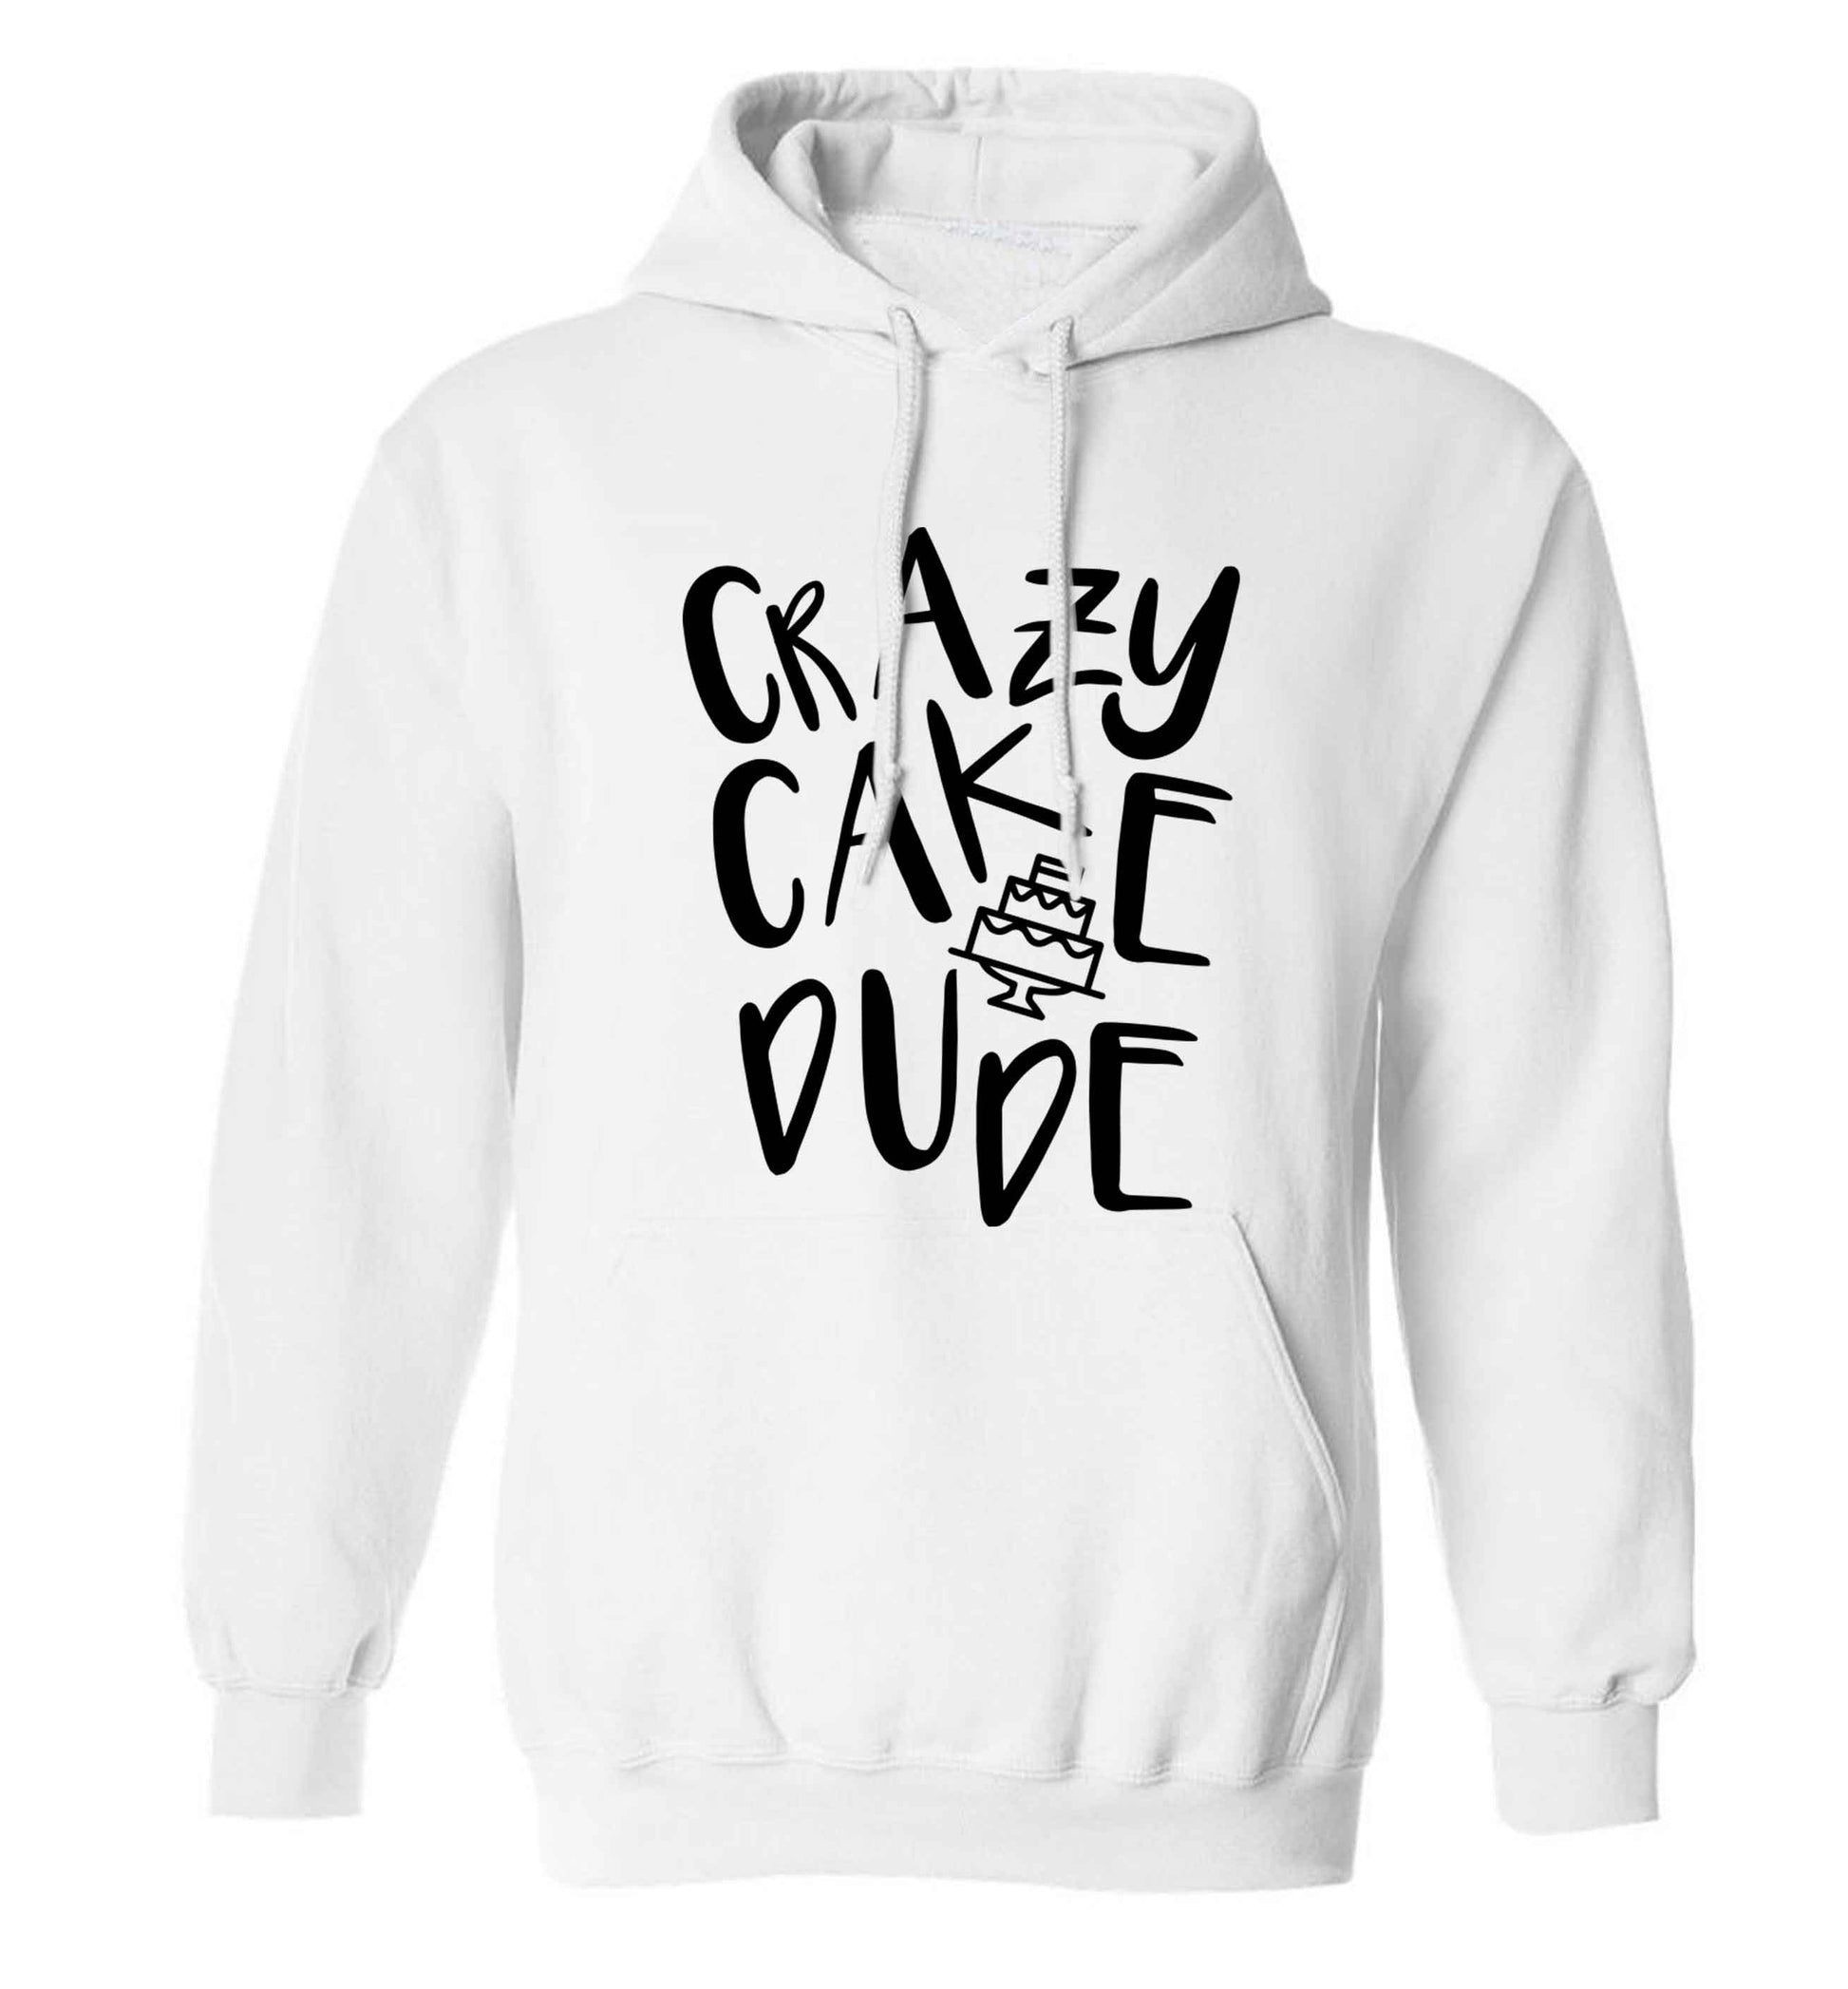 Crazy cake dude adults unisex white hoodie 2XL